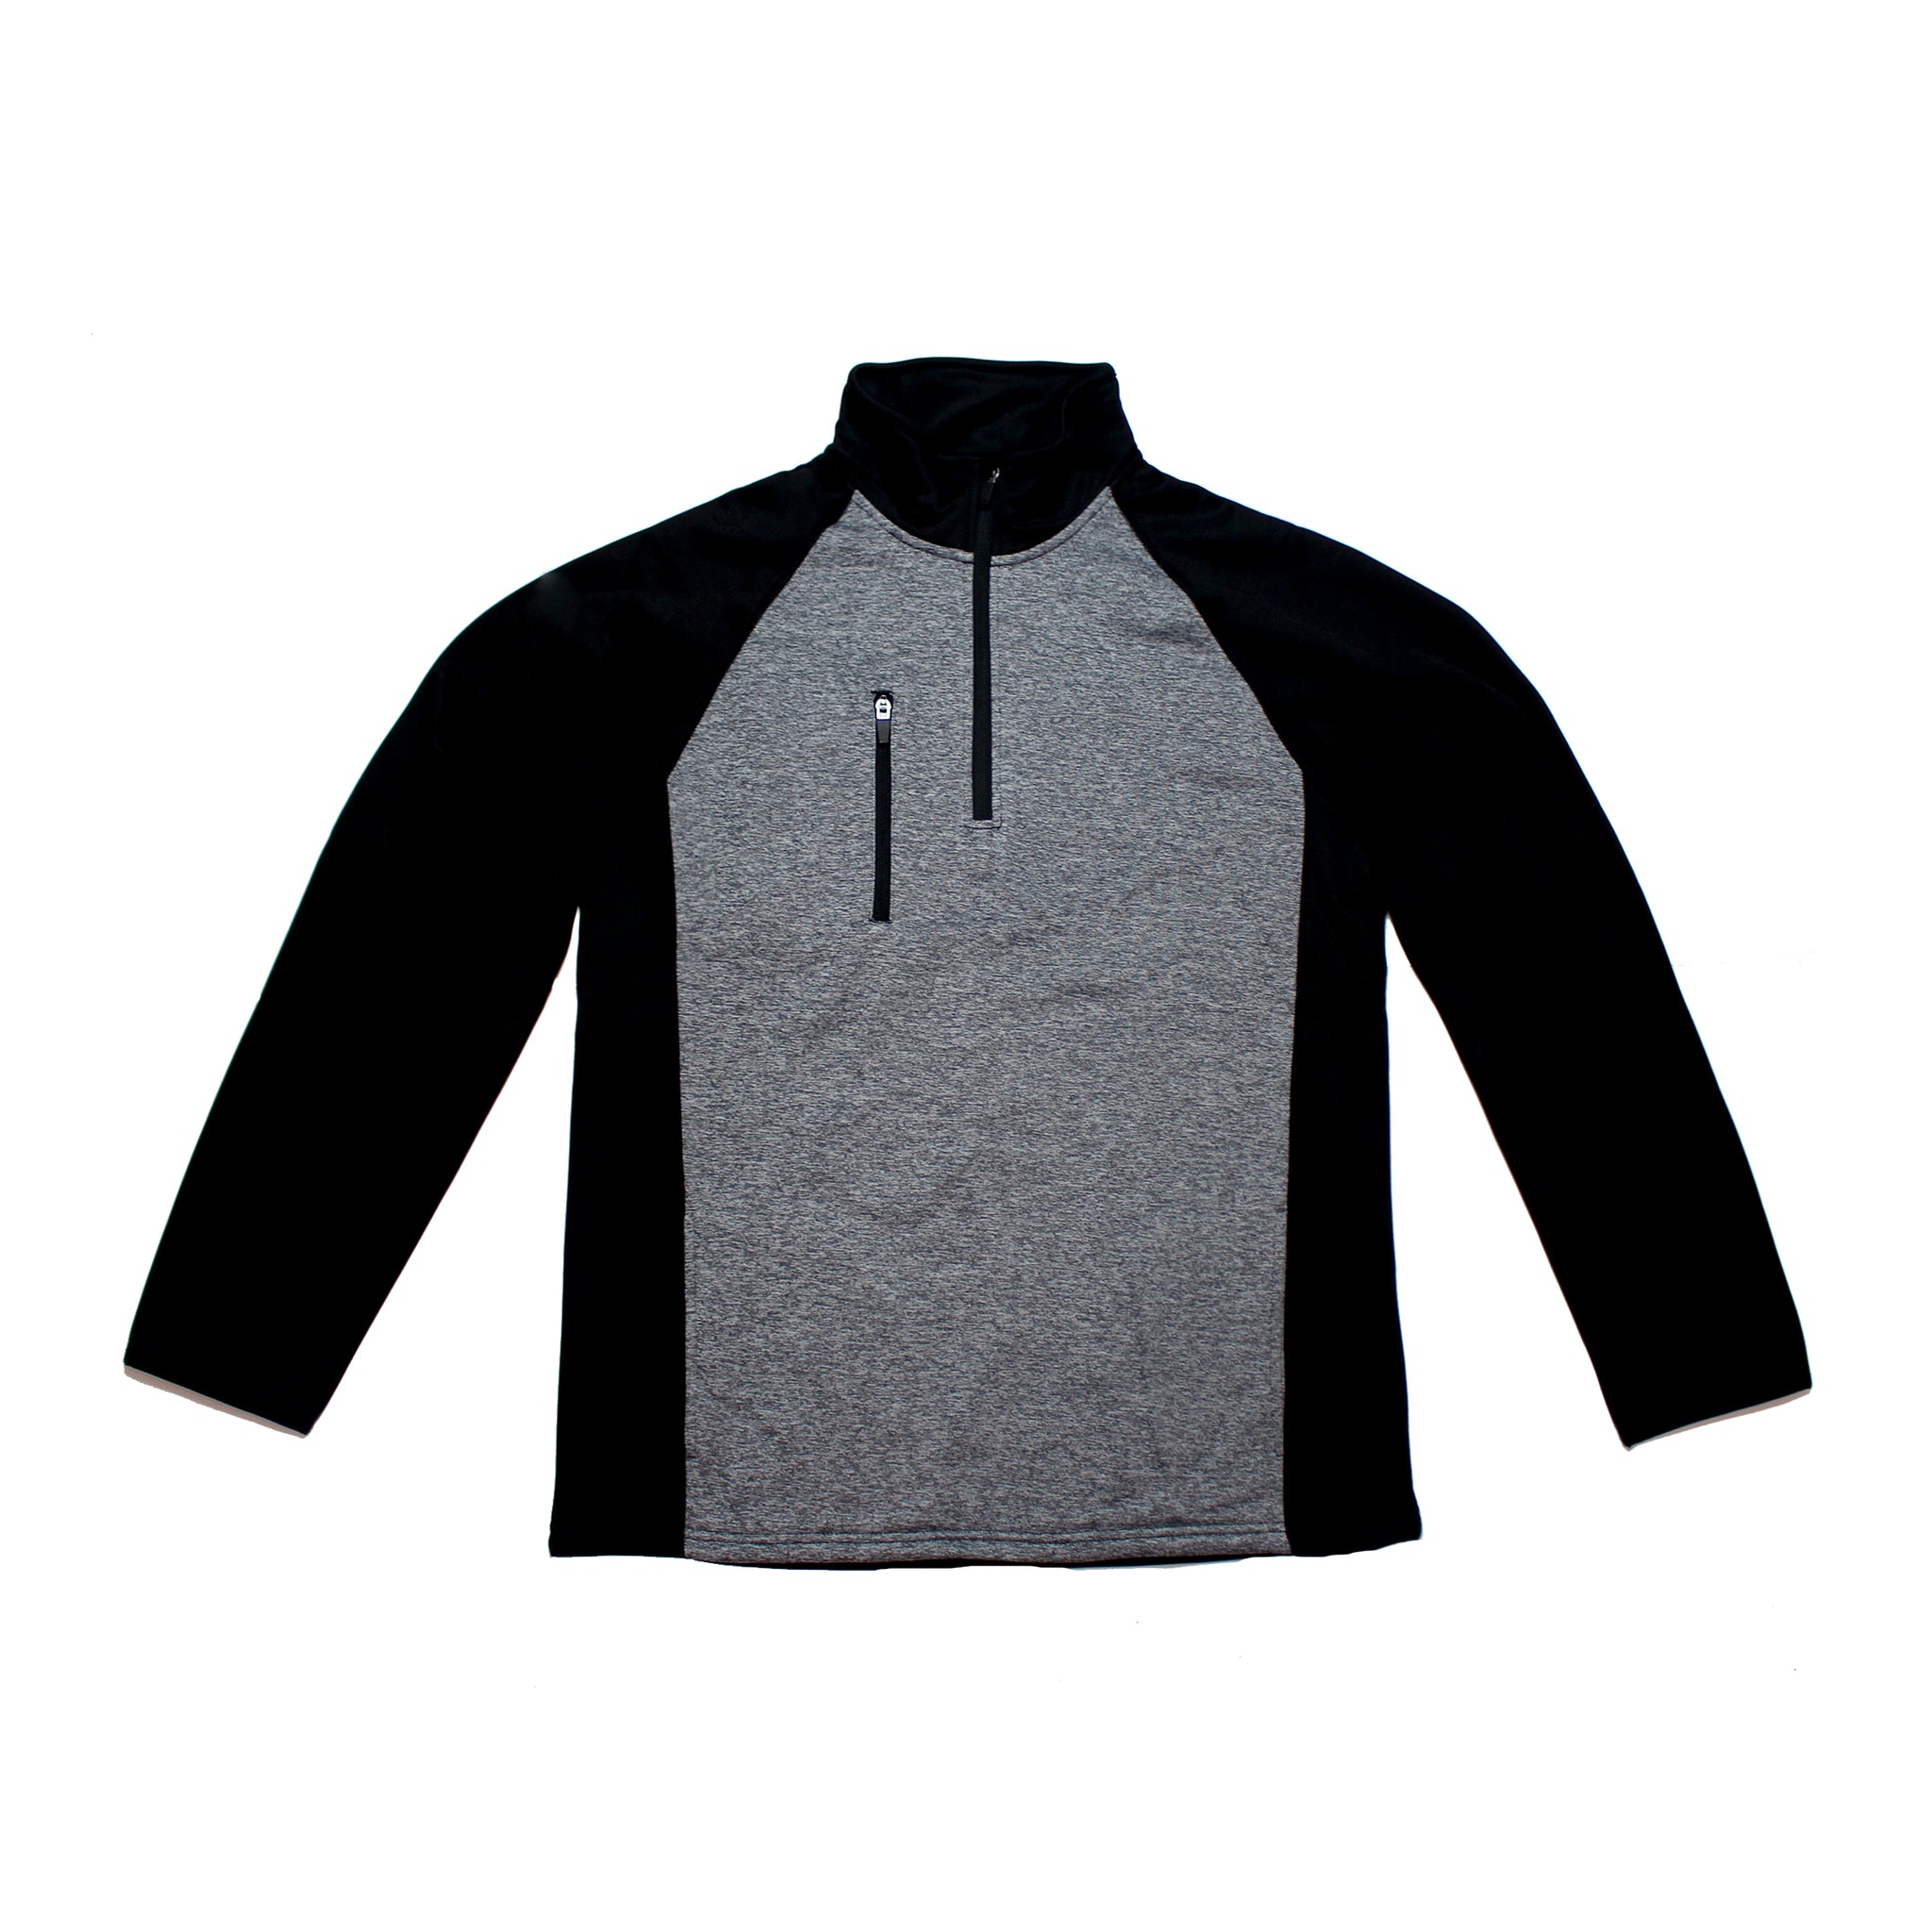 Men's Poly-Flex ¼ Zip Pullover with Heather front panel